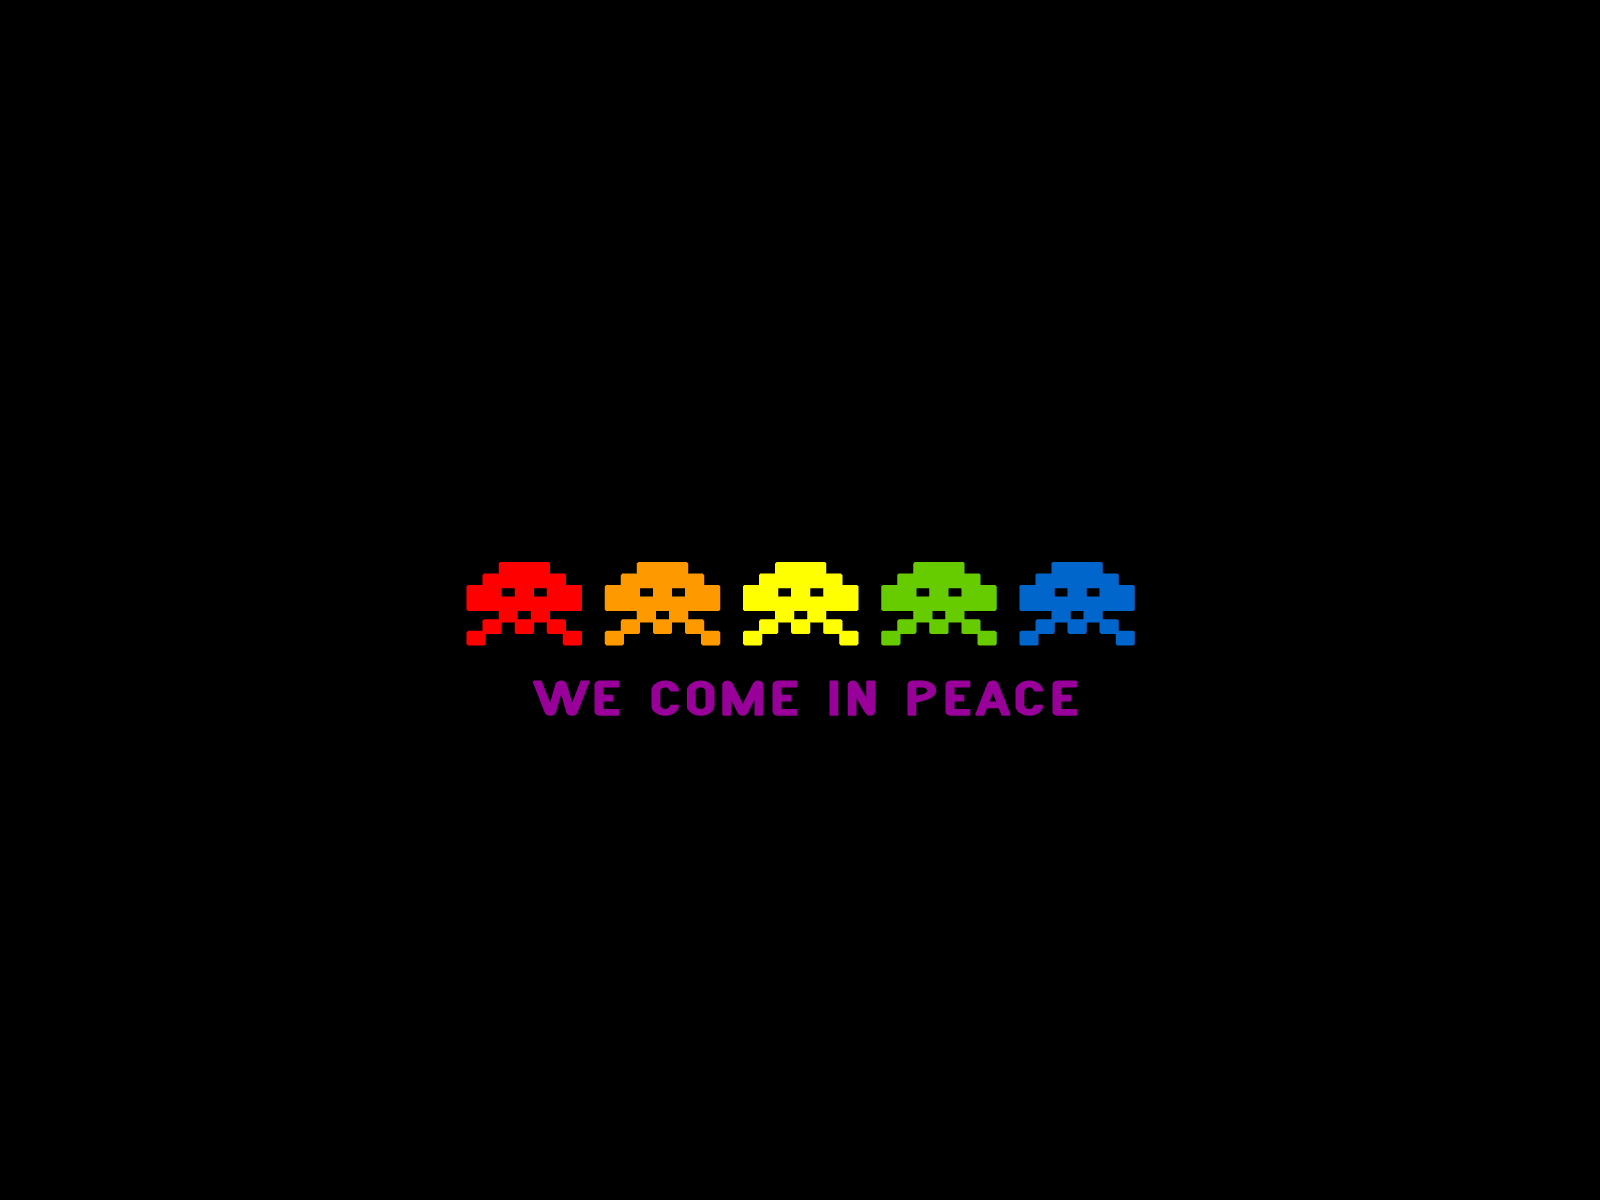 Space Invaders&“We Come in Peace” Wallpapers